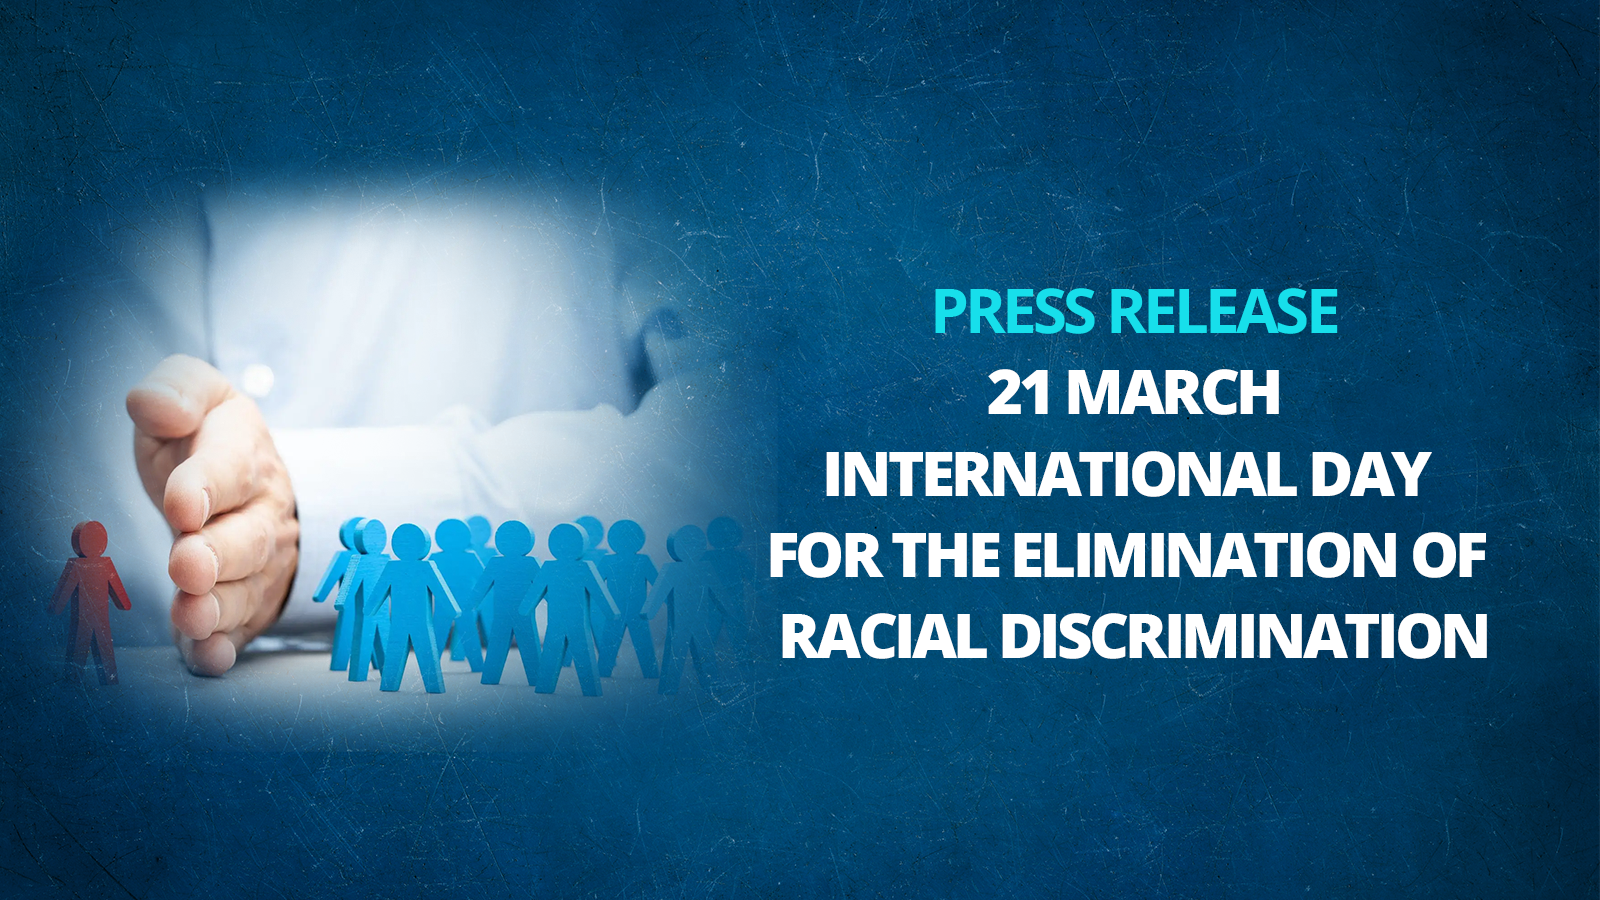 Press Release on the International Day for the Elimination of Racial Discrimination